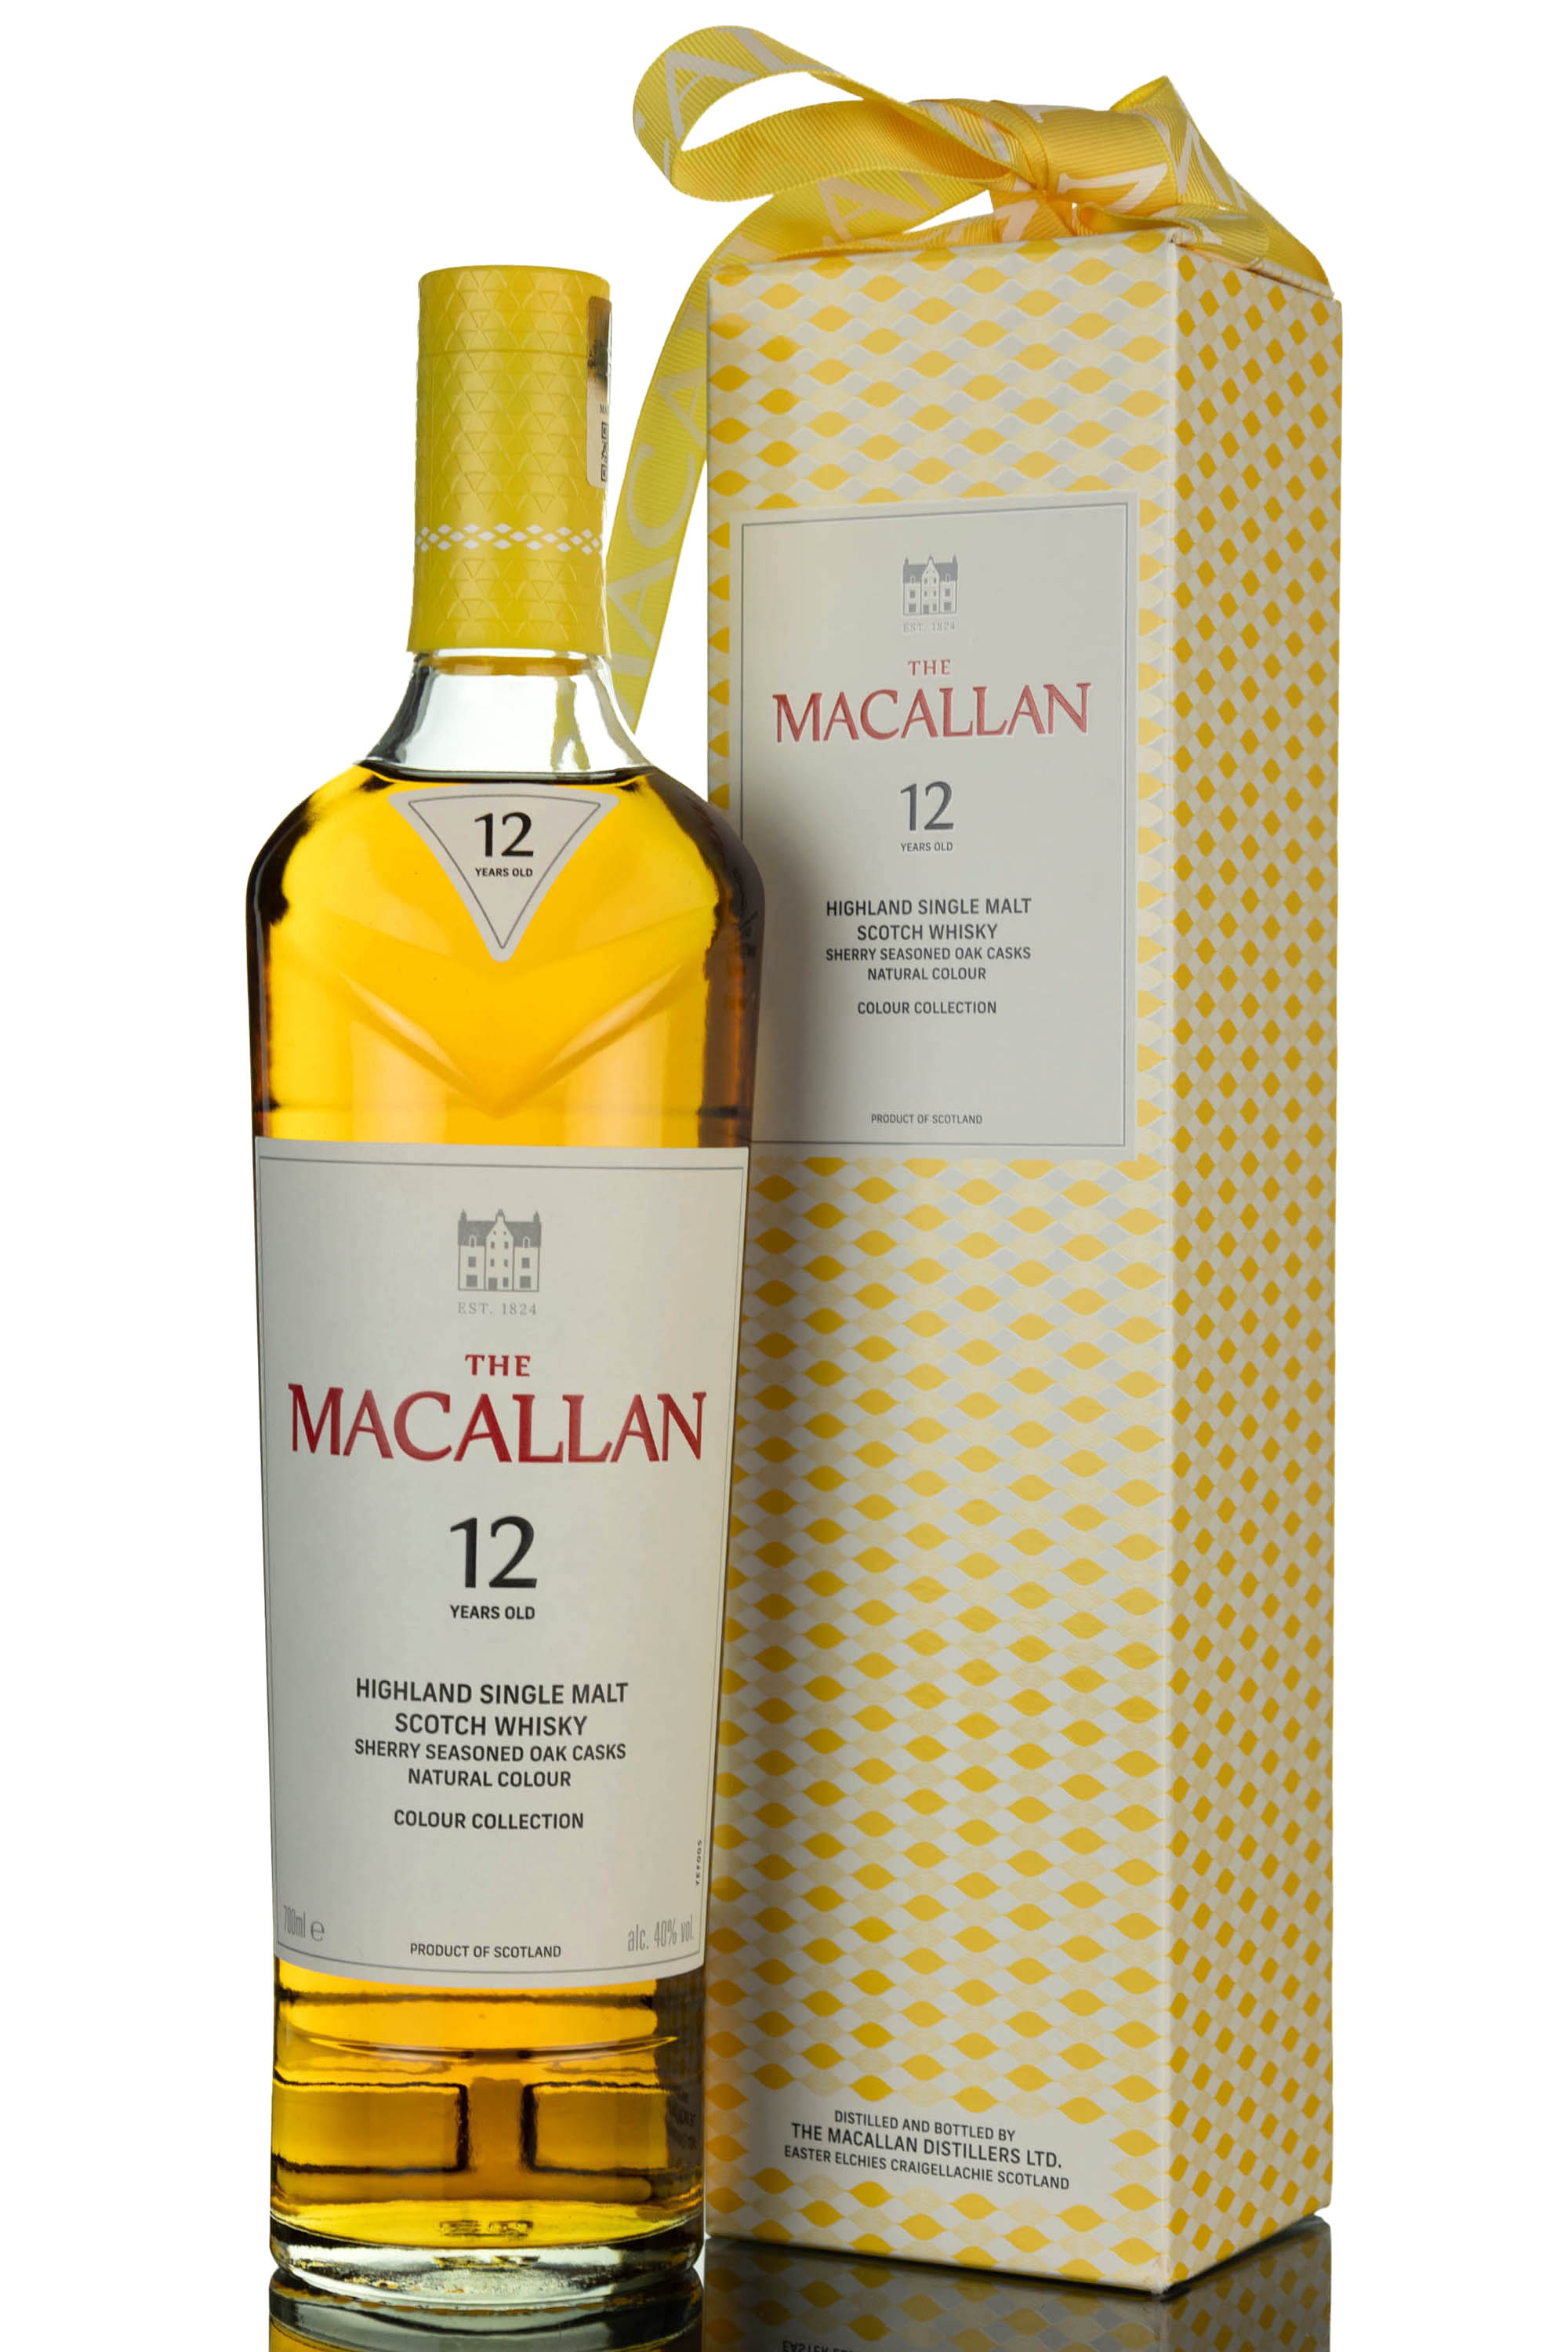 Macallan 12 Year Old - Colour Collection